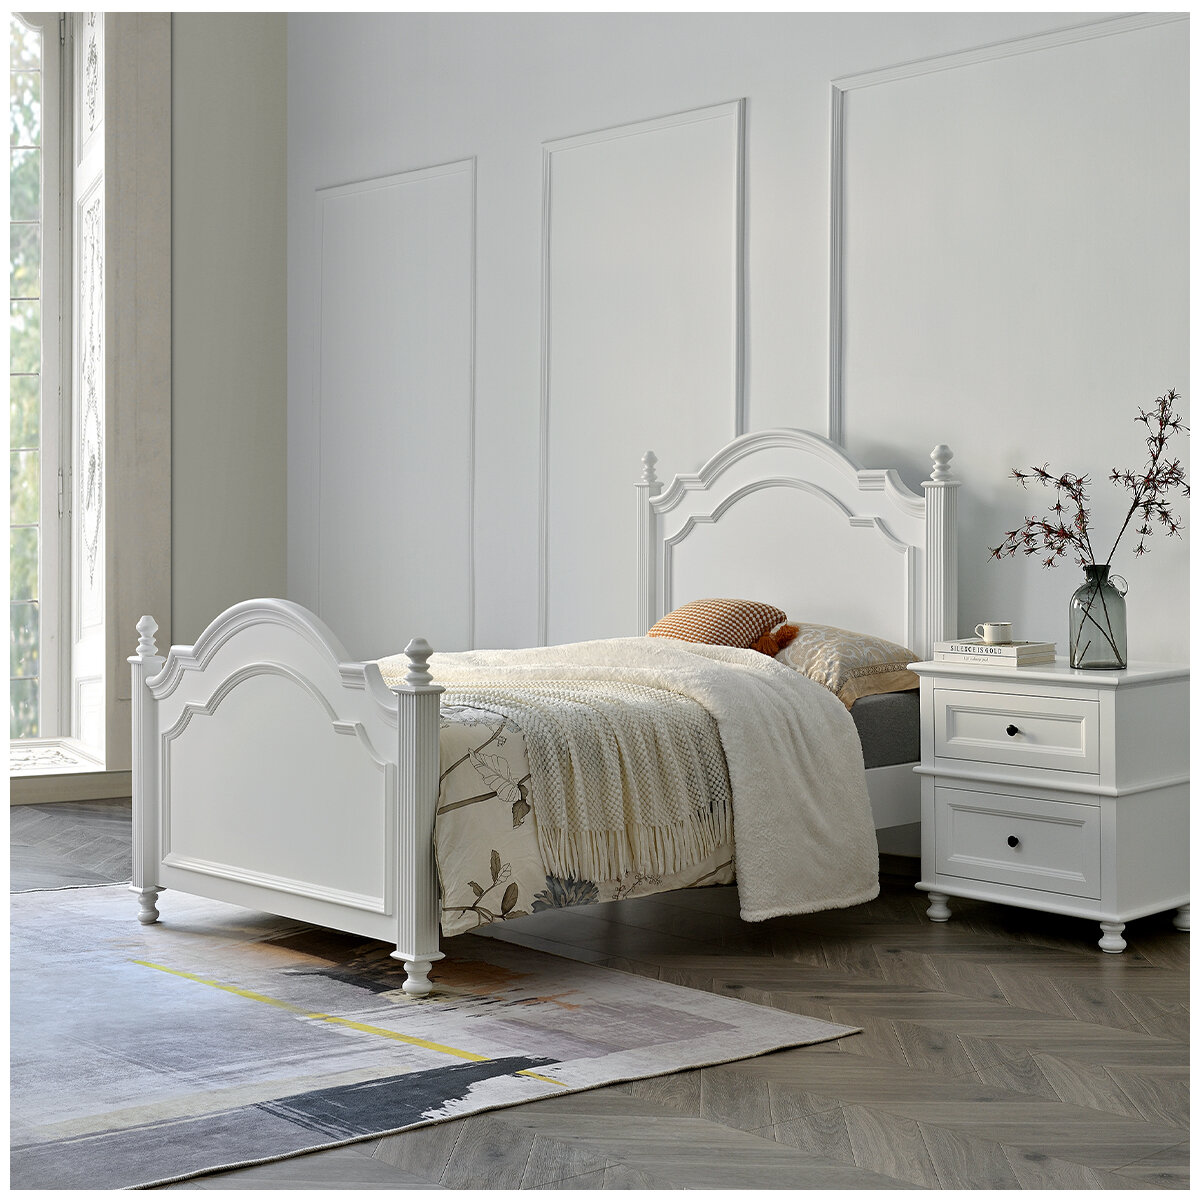 Moran Cassis King Single Bed with Encasement and Slats, White